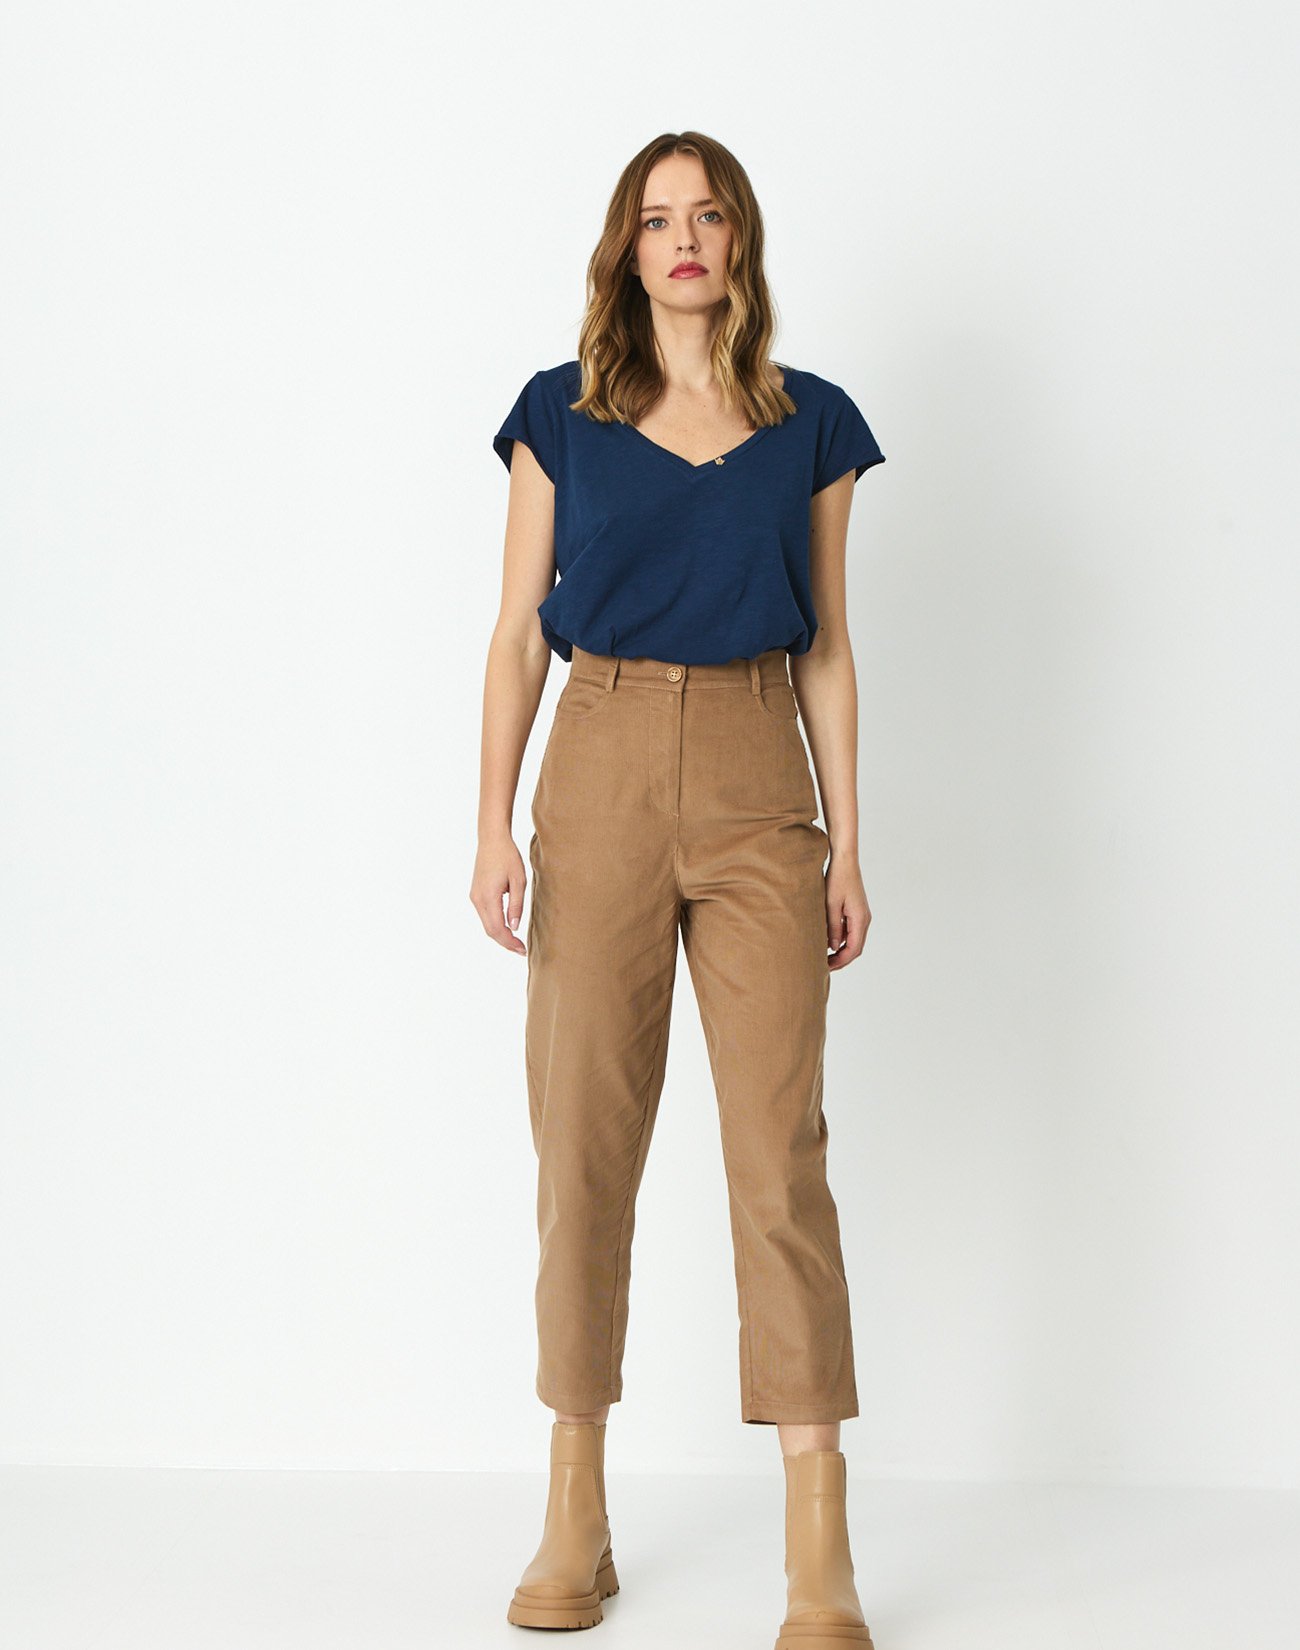 Mom fit corduroy trousers